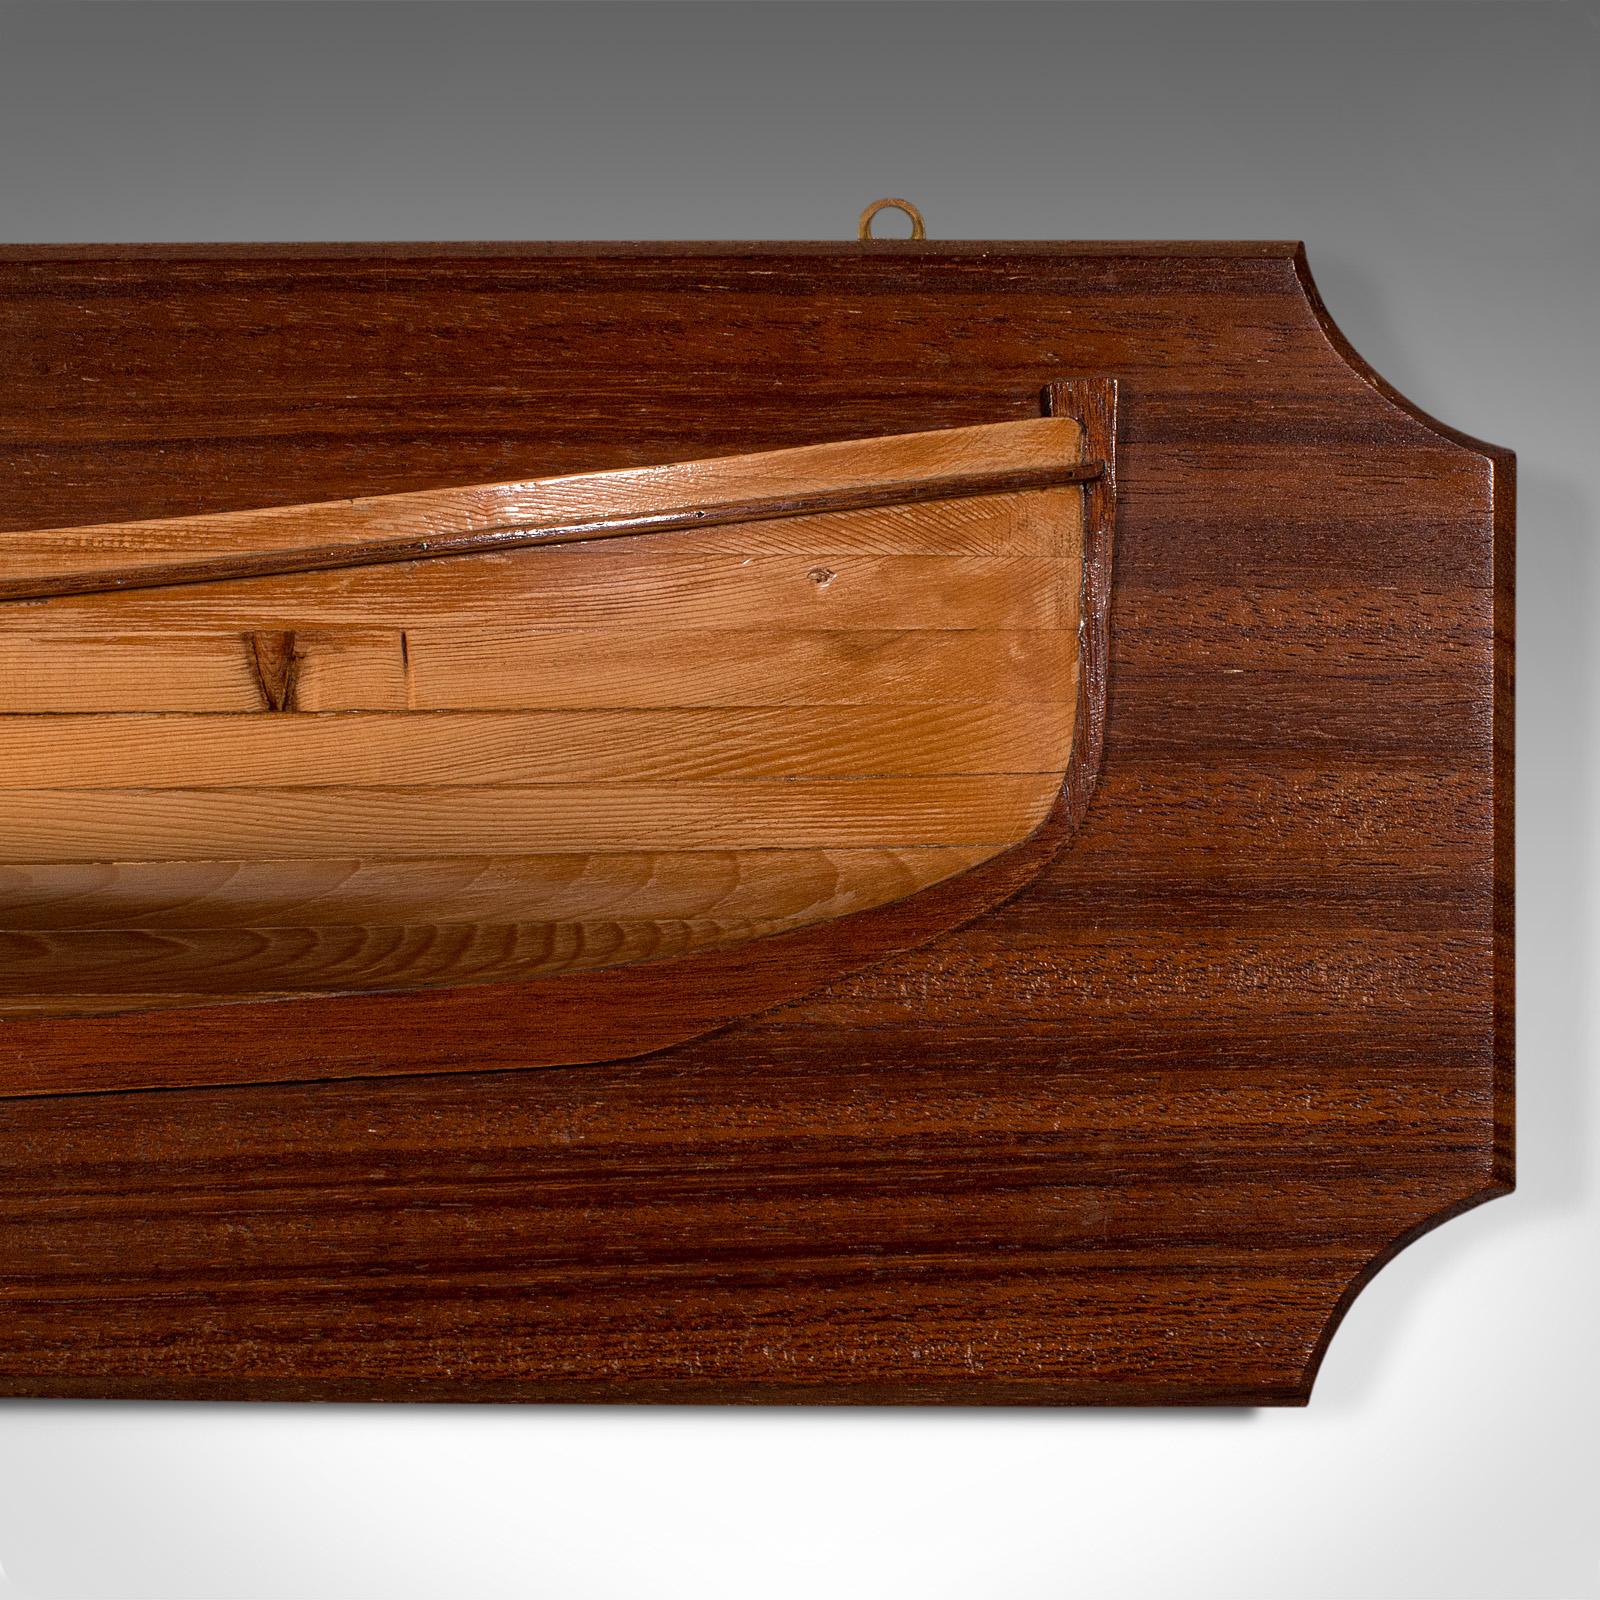 Wood Antique Boat's Half Hull Plaque, English, Decorative Maritime Model, Edwardian For Sale